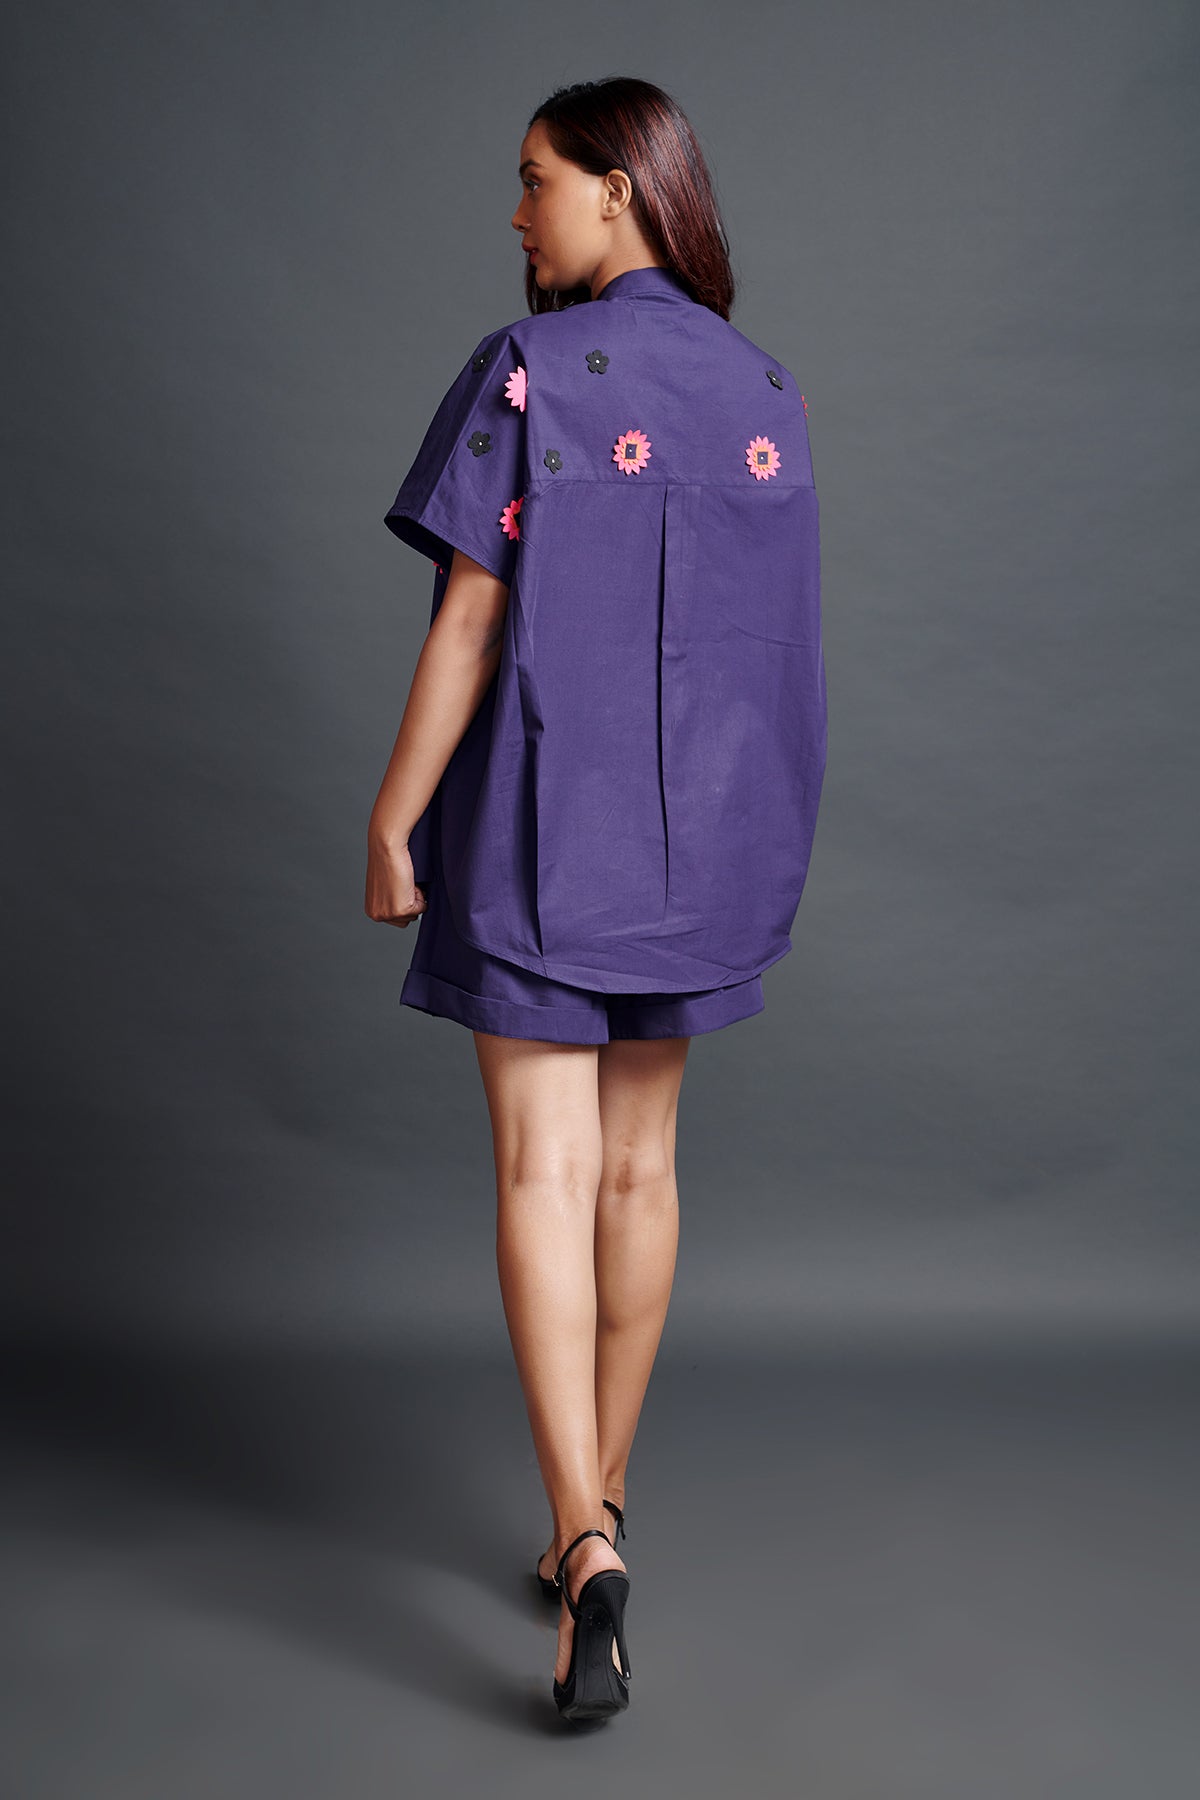 Image of PURPLE OVERSIZED SHIRT IN COTTON BASE WITH CUTWORK EMBROIDERY. IT IS PAIRED WITH MATCHING SHORTS. From savoirfashions.com